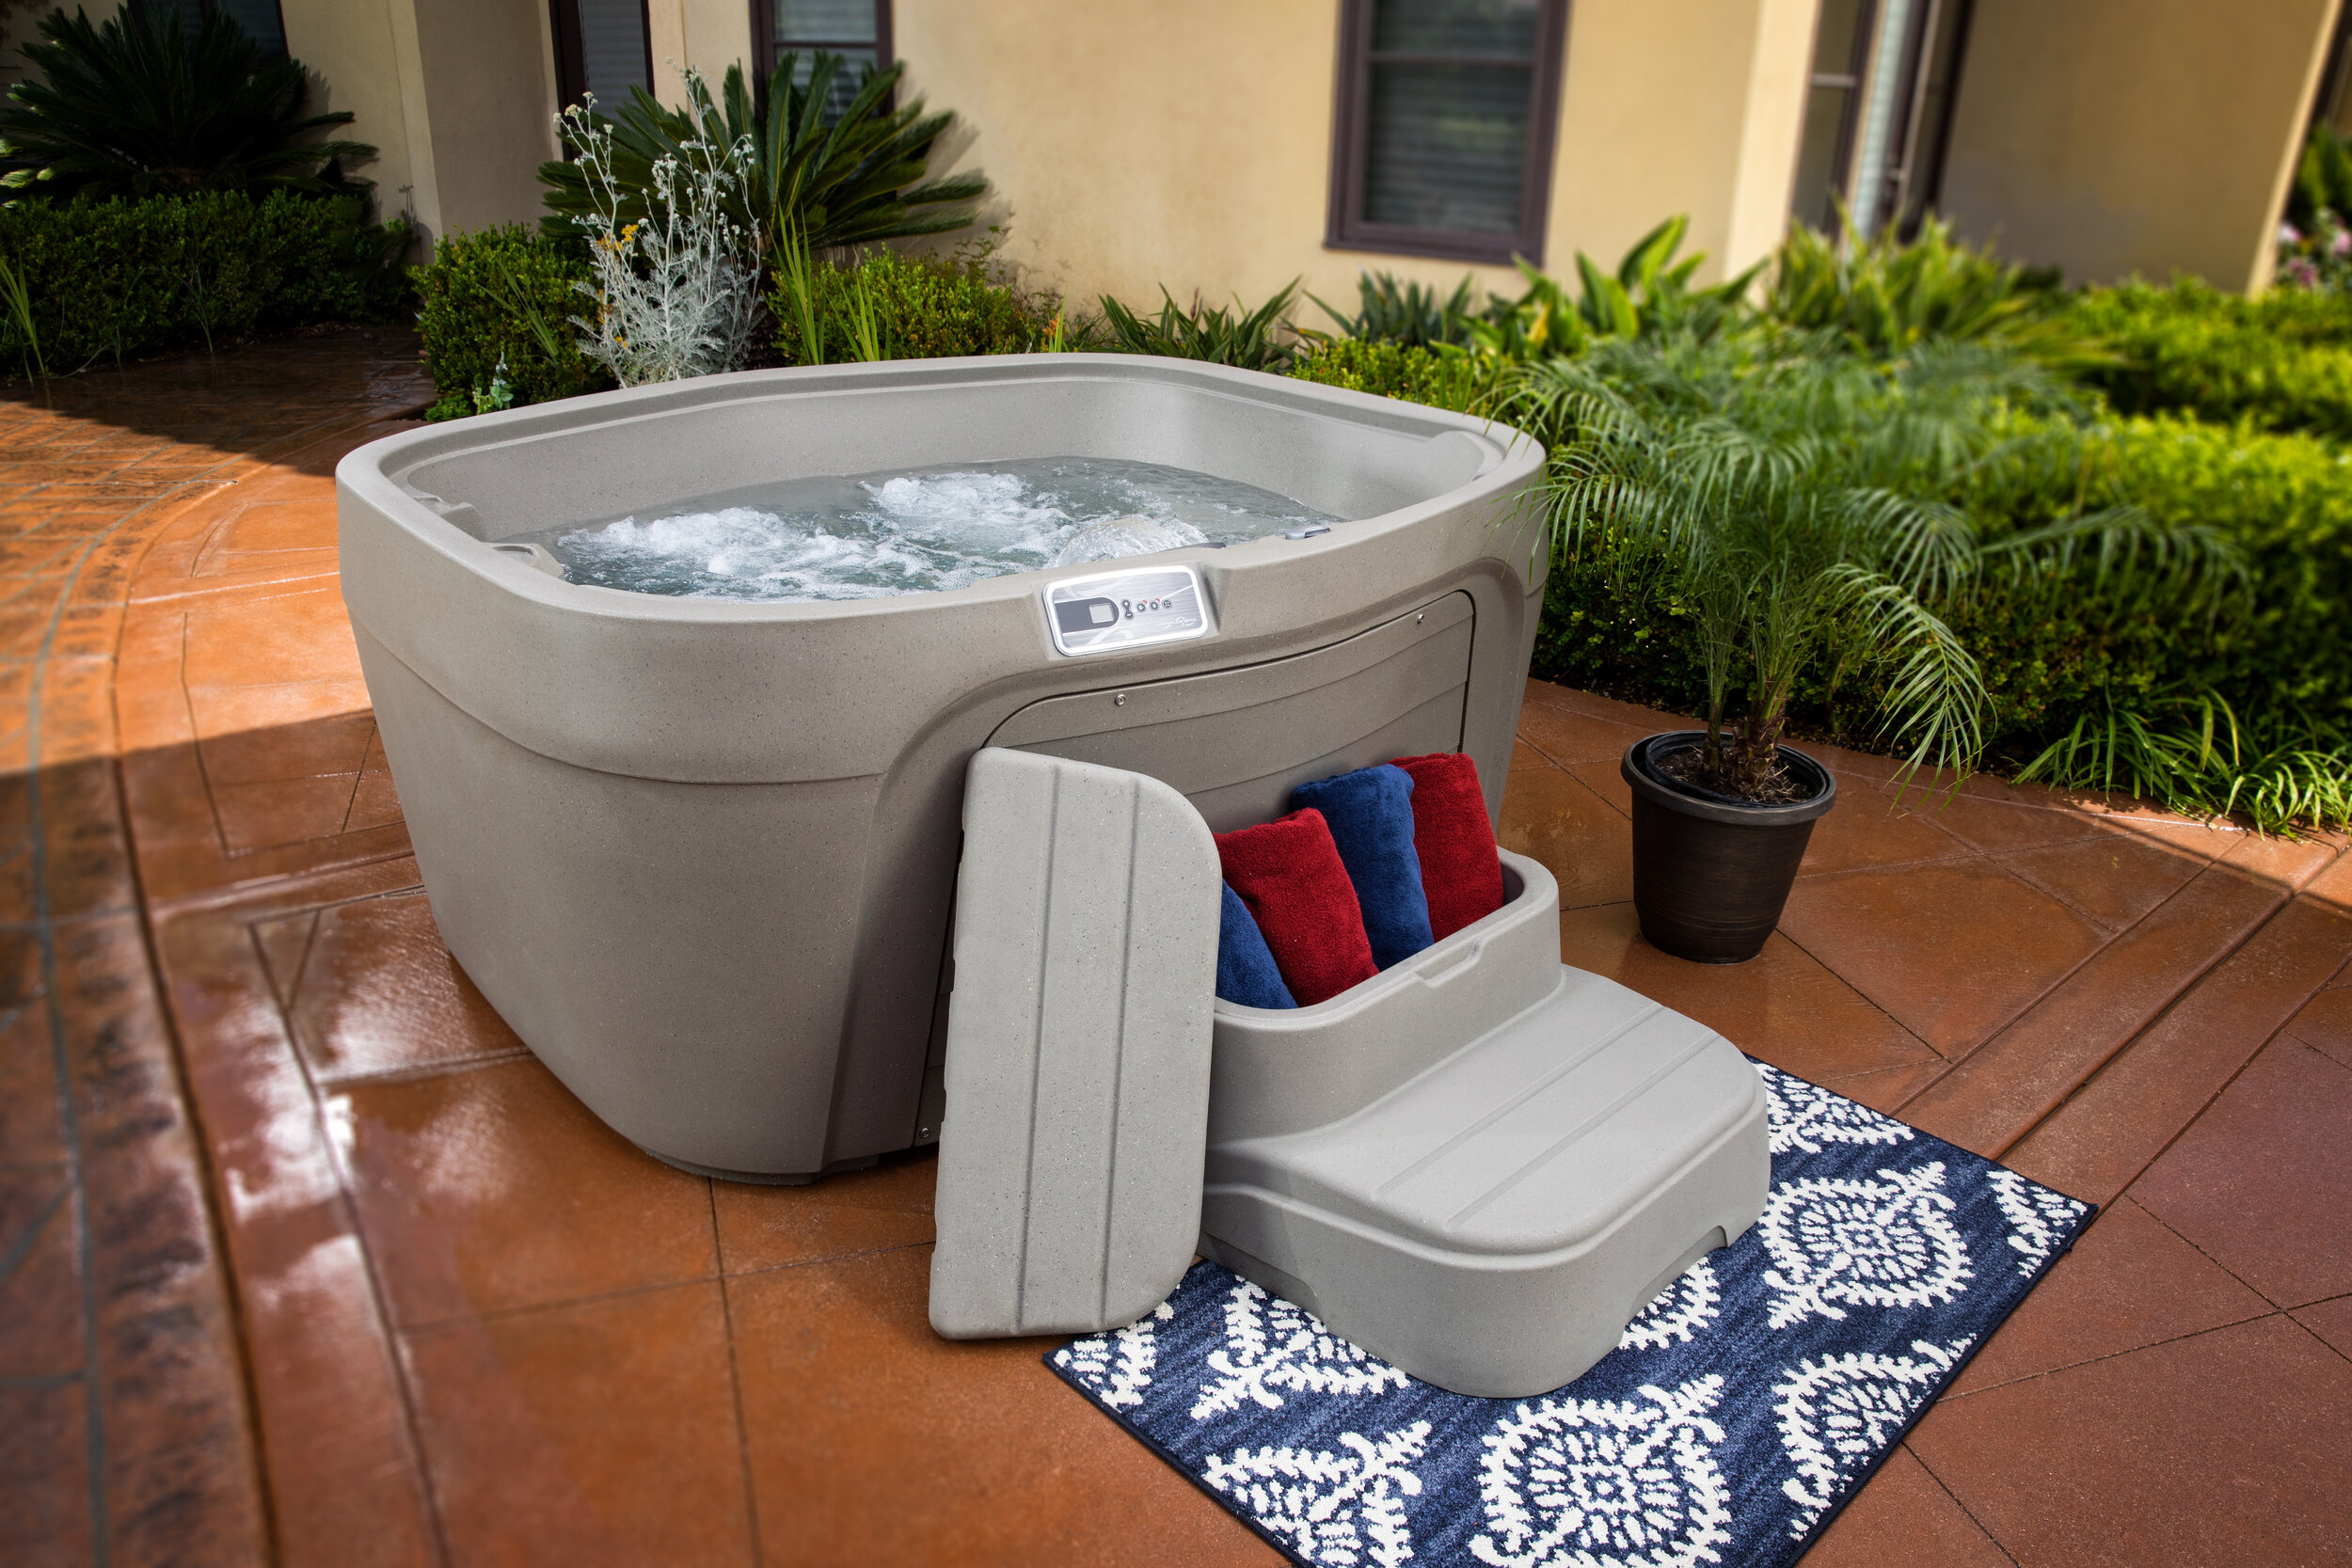 Luxurious Accessories to Enhance Your Home Hot Tub Experience